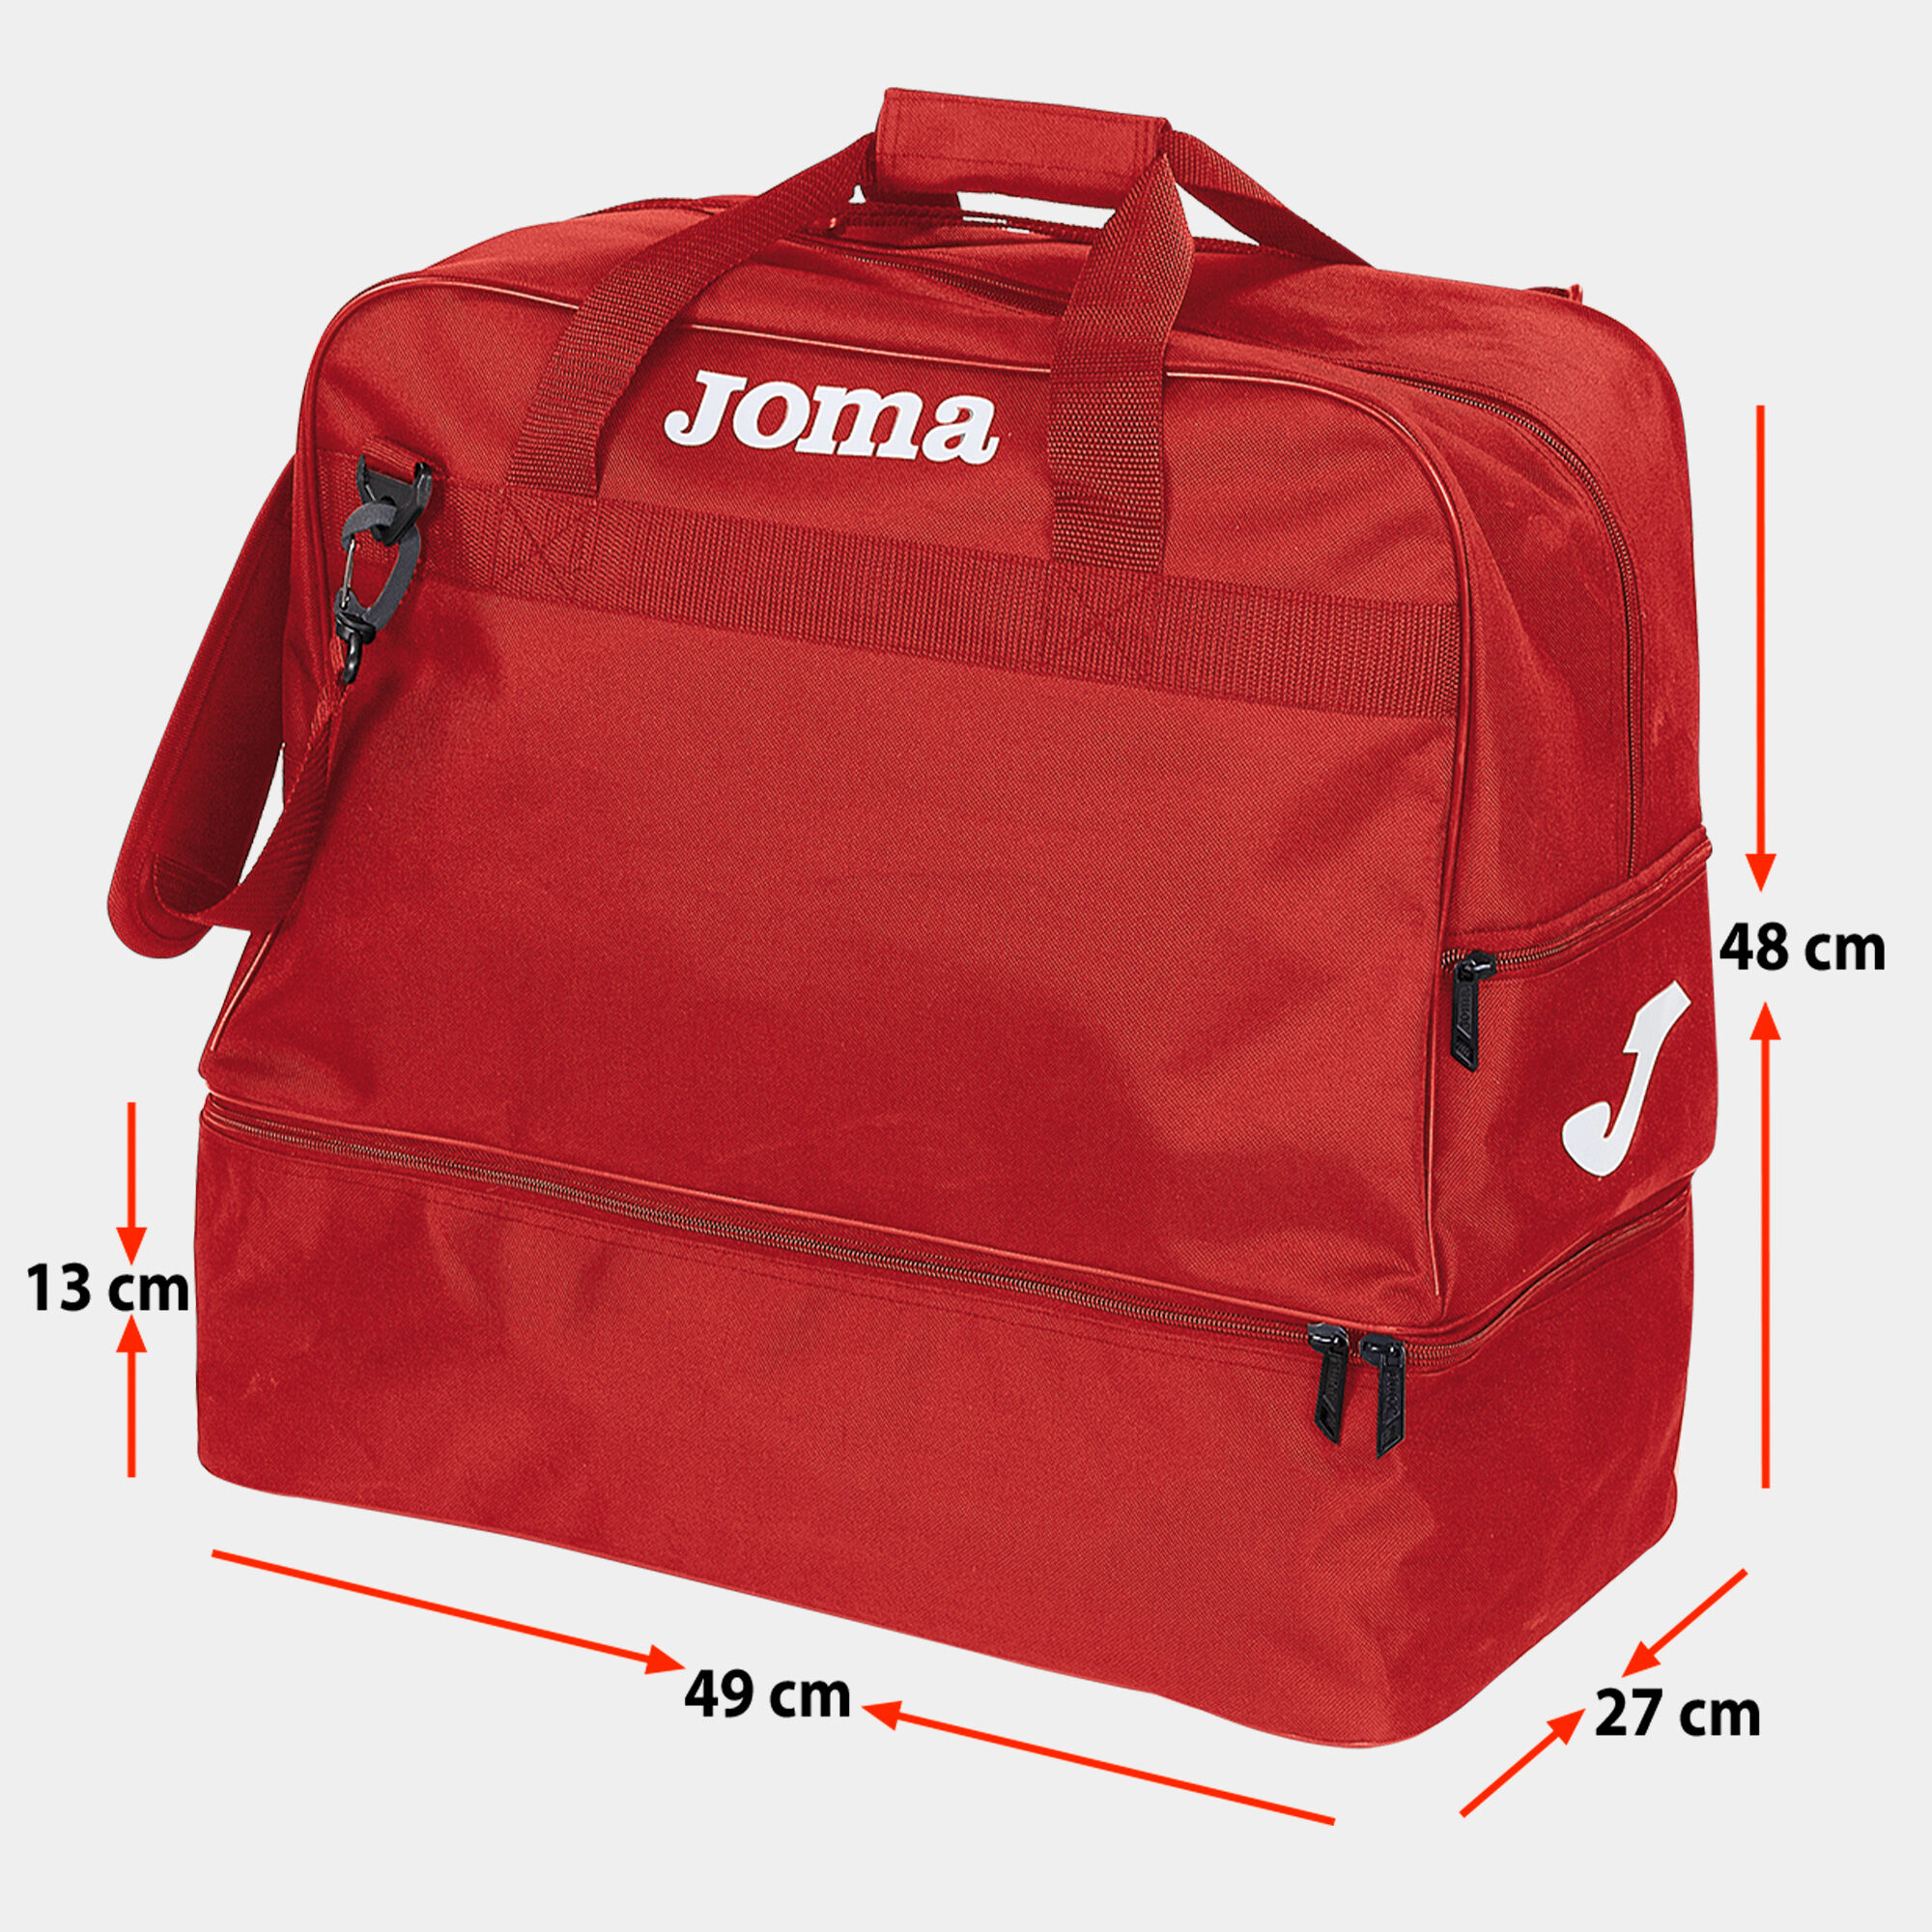 JOMA TRAINING BAG III with BOOT COMPARTMENT **New 2019**   3 COLOURWAYS 